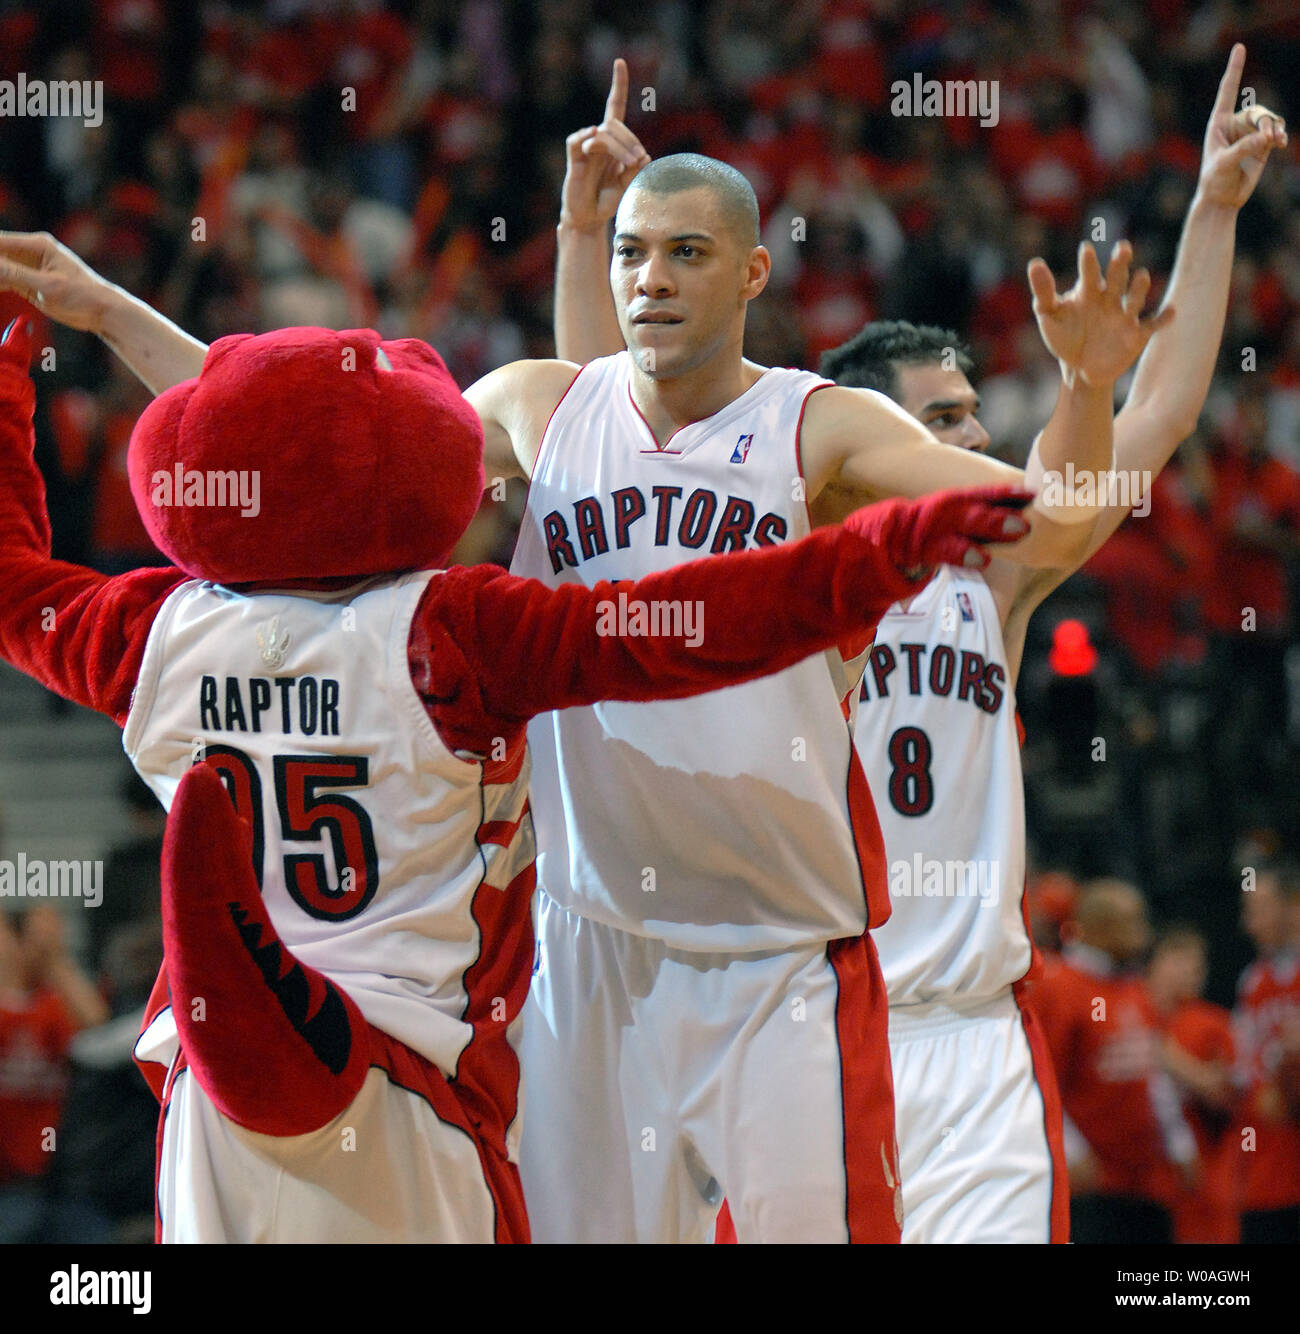 Toronto Raptors' Anthony Parker (R) celebrates with the team mascot after Toronto defeated the Orlando Magic 108-94 in Game 3 of their playoff series at the Air Canada Center in Toronto, Canada on April 24, 2008. (UPI Photo/Christine Chew) Stock Photo